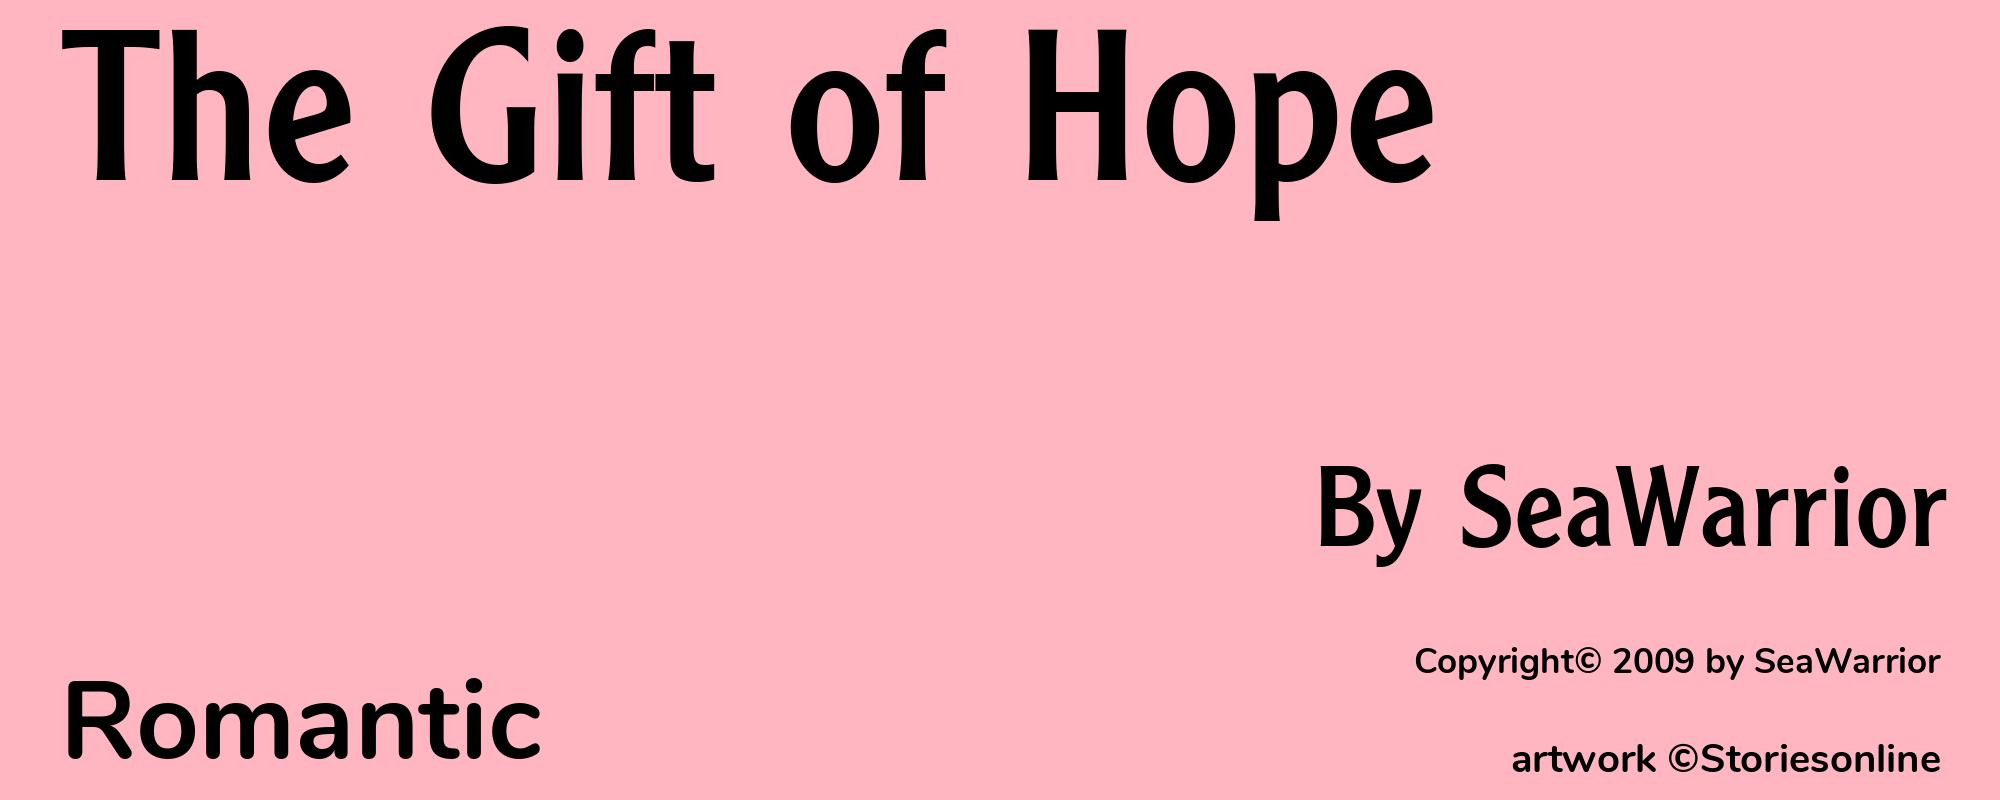 The Gift of Hope - Cover